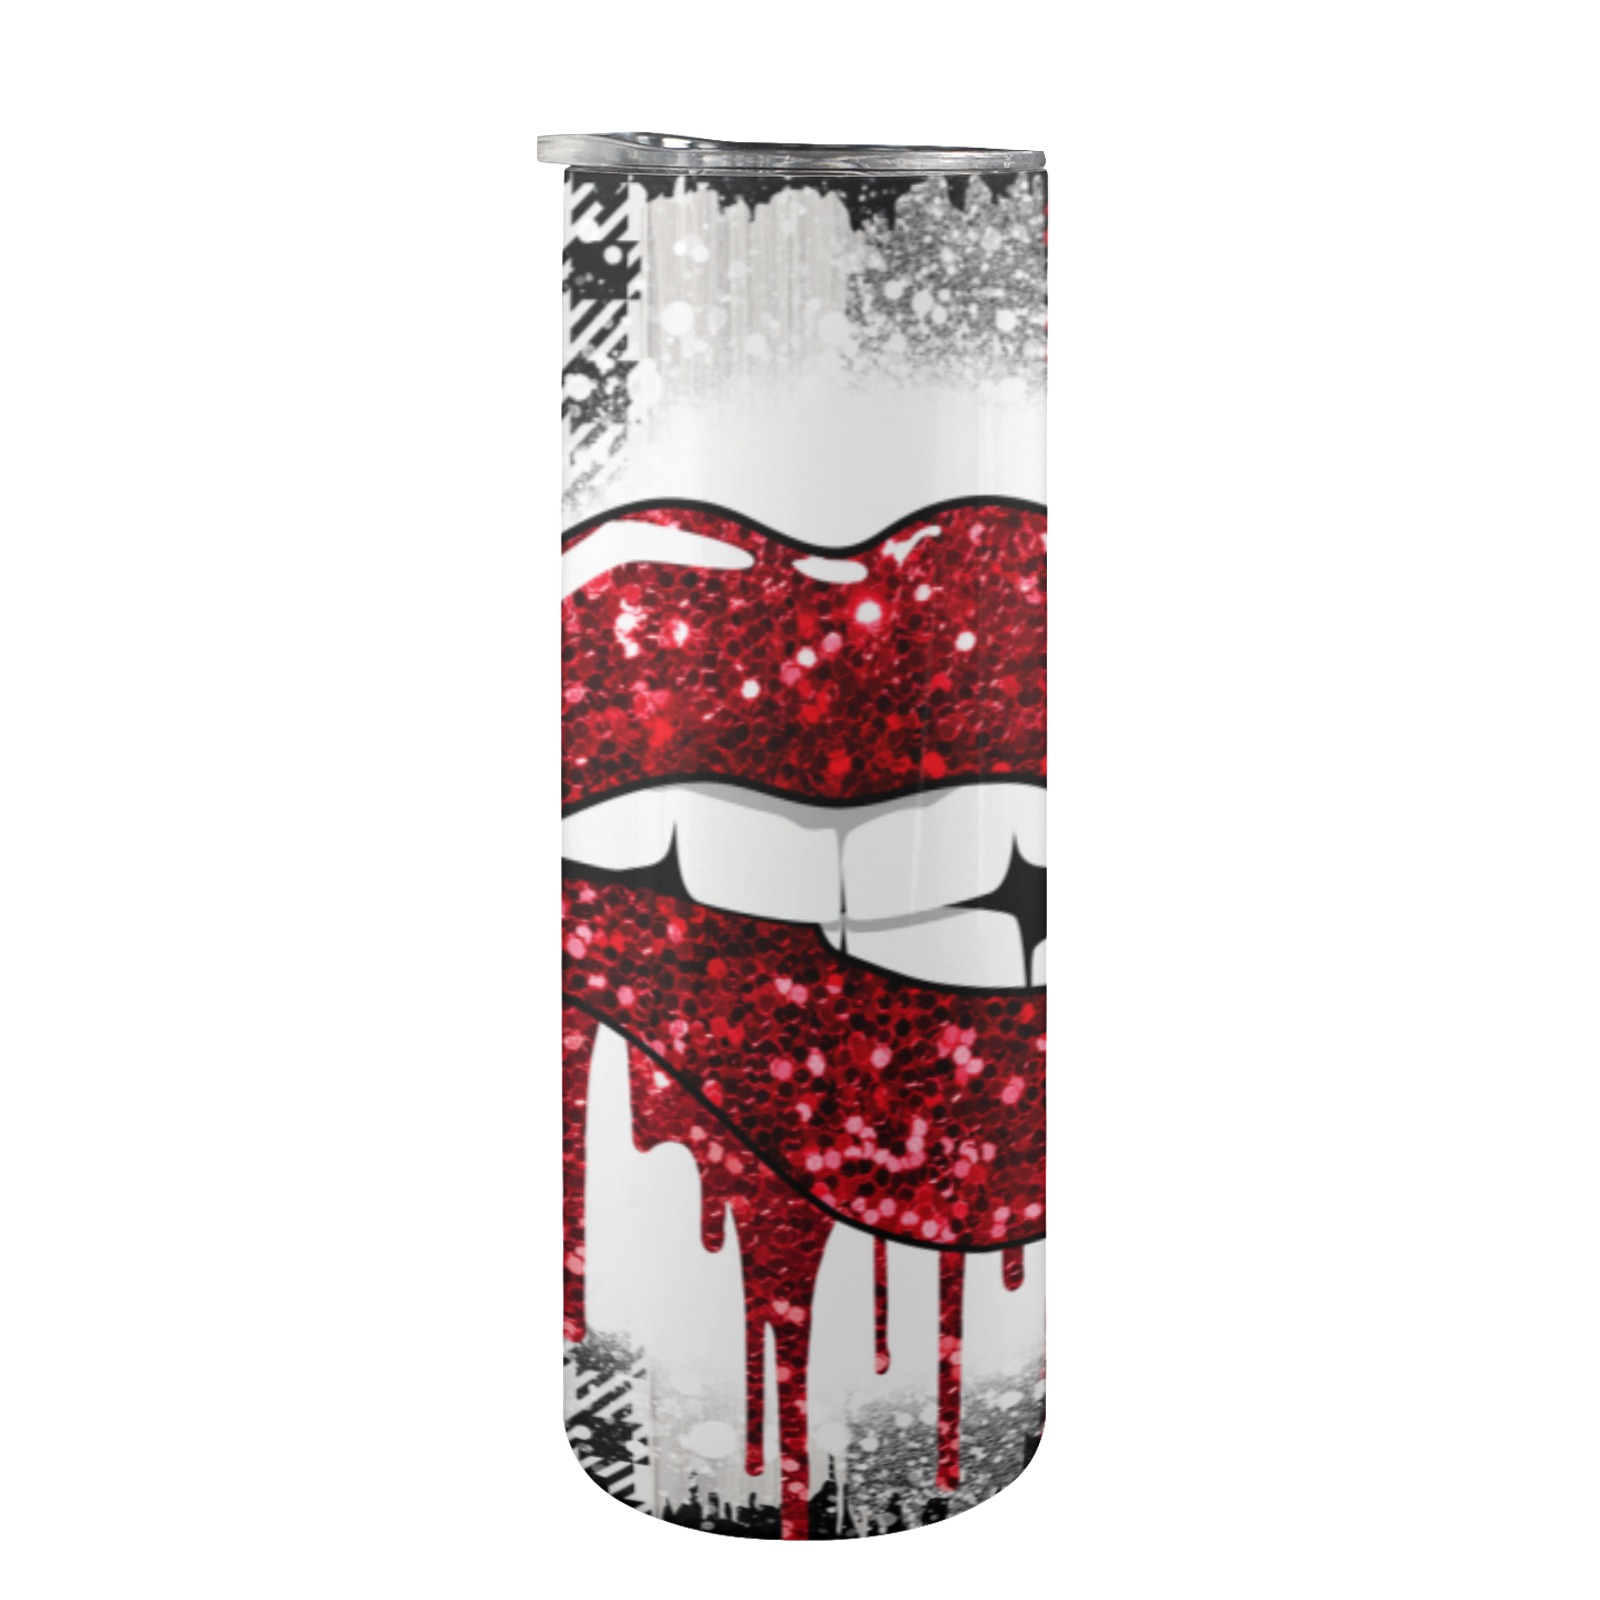 Dripping Lips Valentine Tumbler Wrap 20oz Tall Skinny Tumbler with Lid and Straw